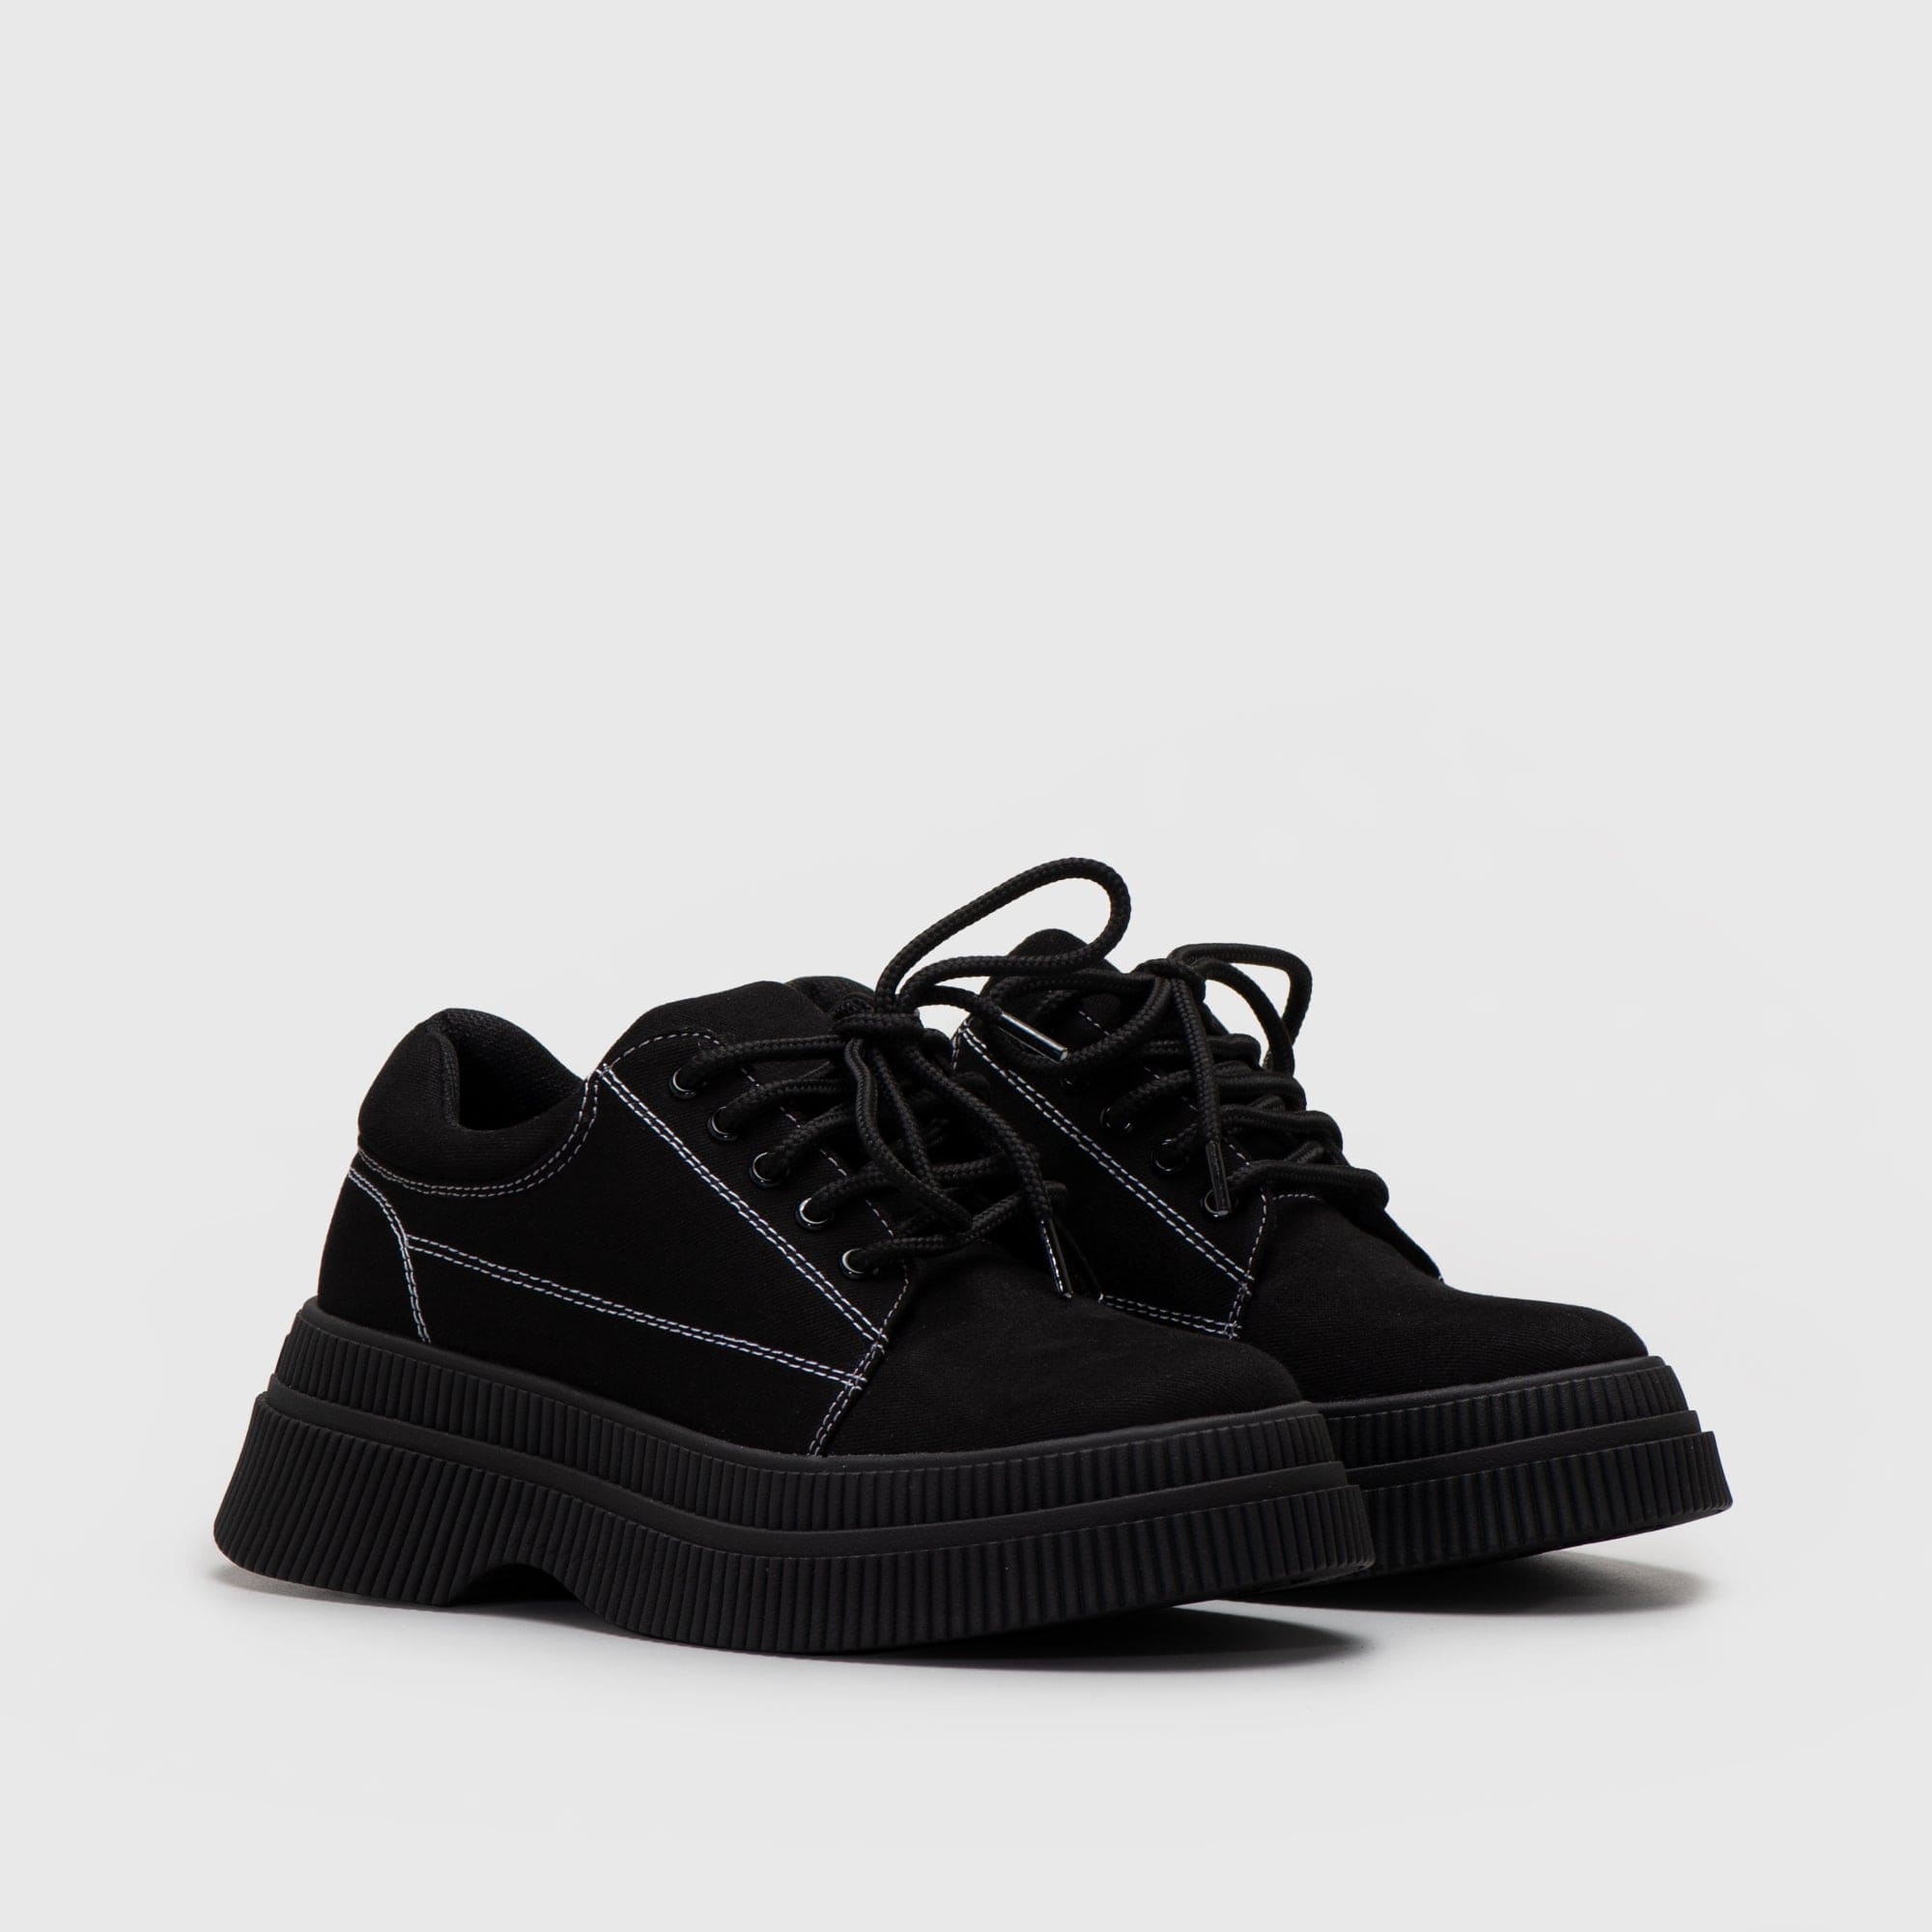 Adorable Projects Official Adorableprojects - Latizia Platform Sneakers Black - Chunky Hitam